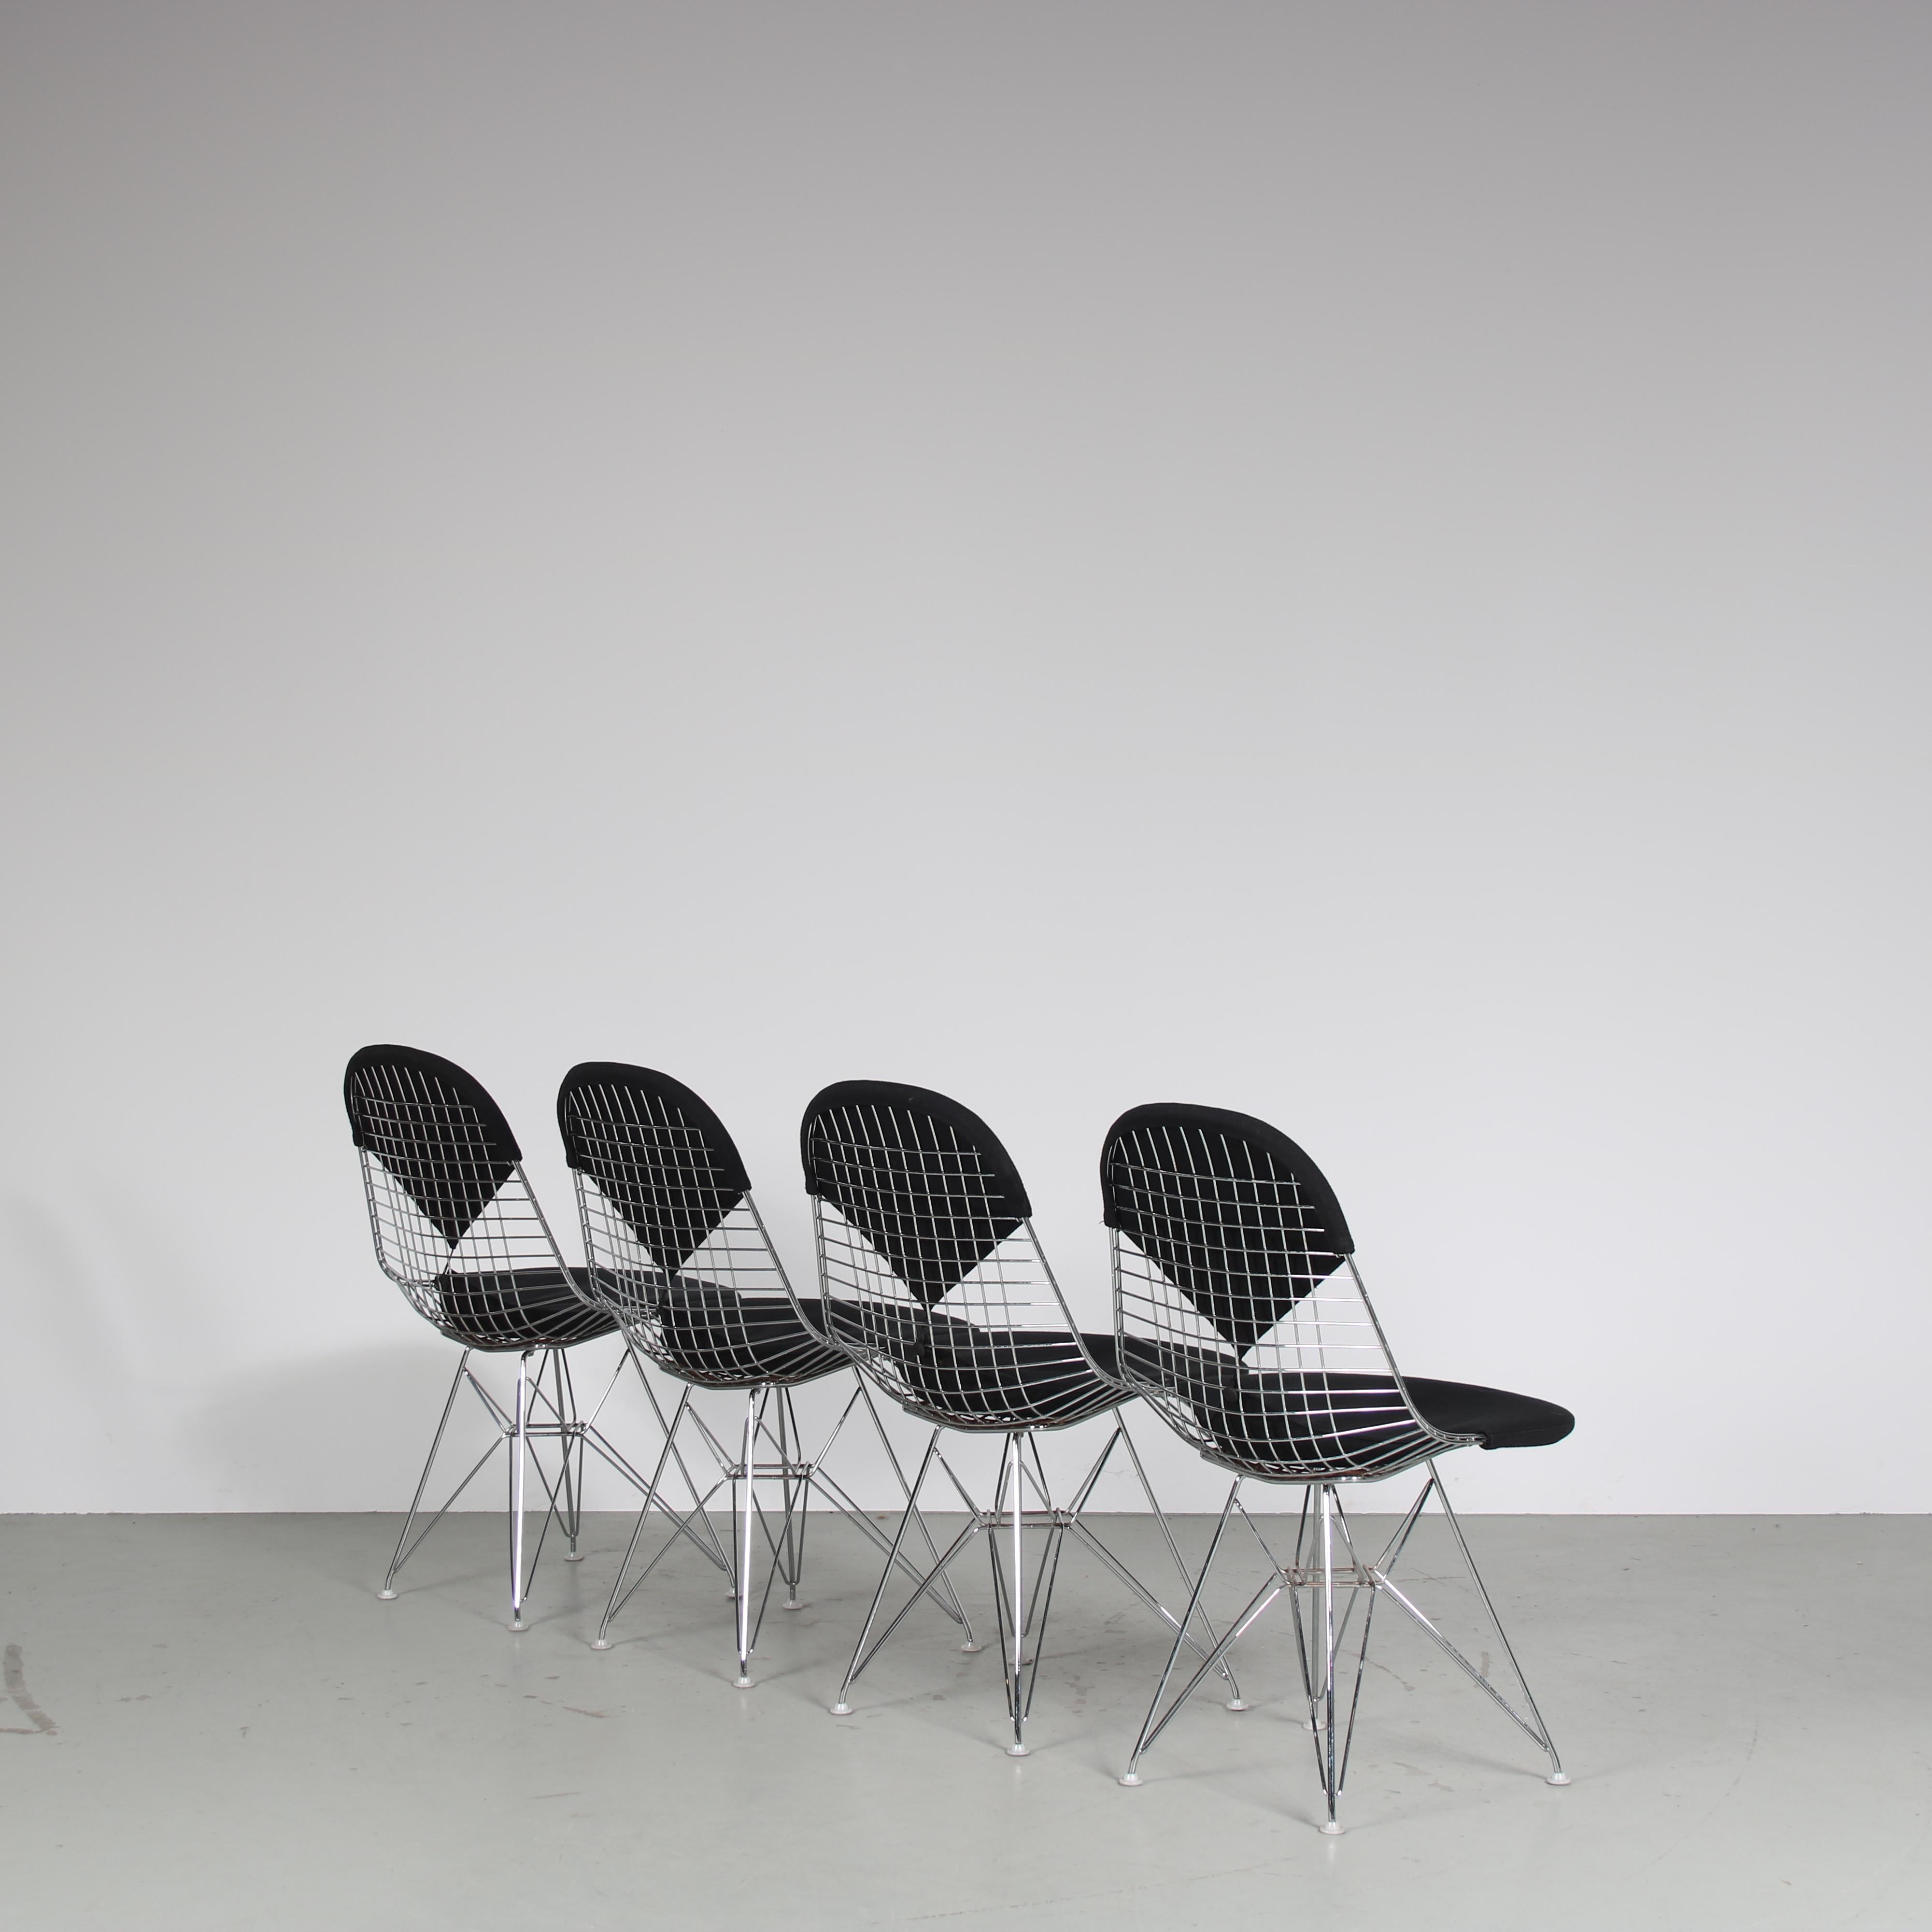 Late 20th Century 1990s Set of 4 “Bikini” Chairs by Charles & Ray Eames for Vitra, Germany